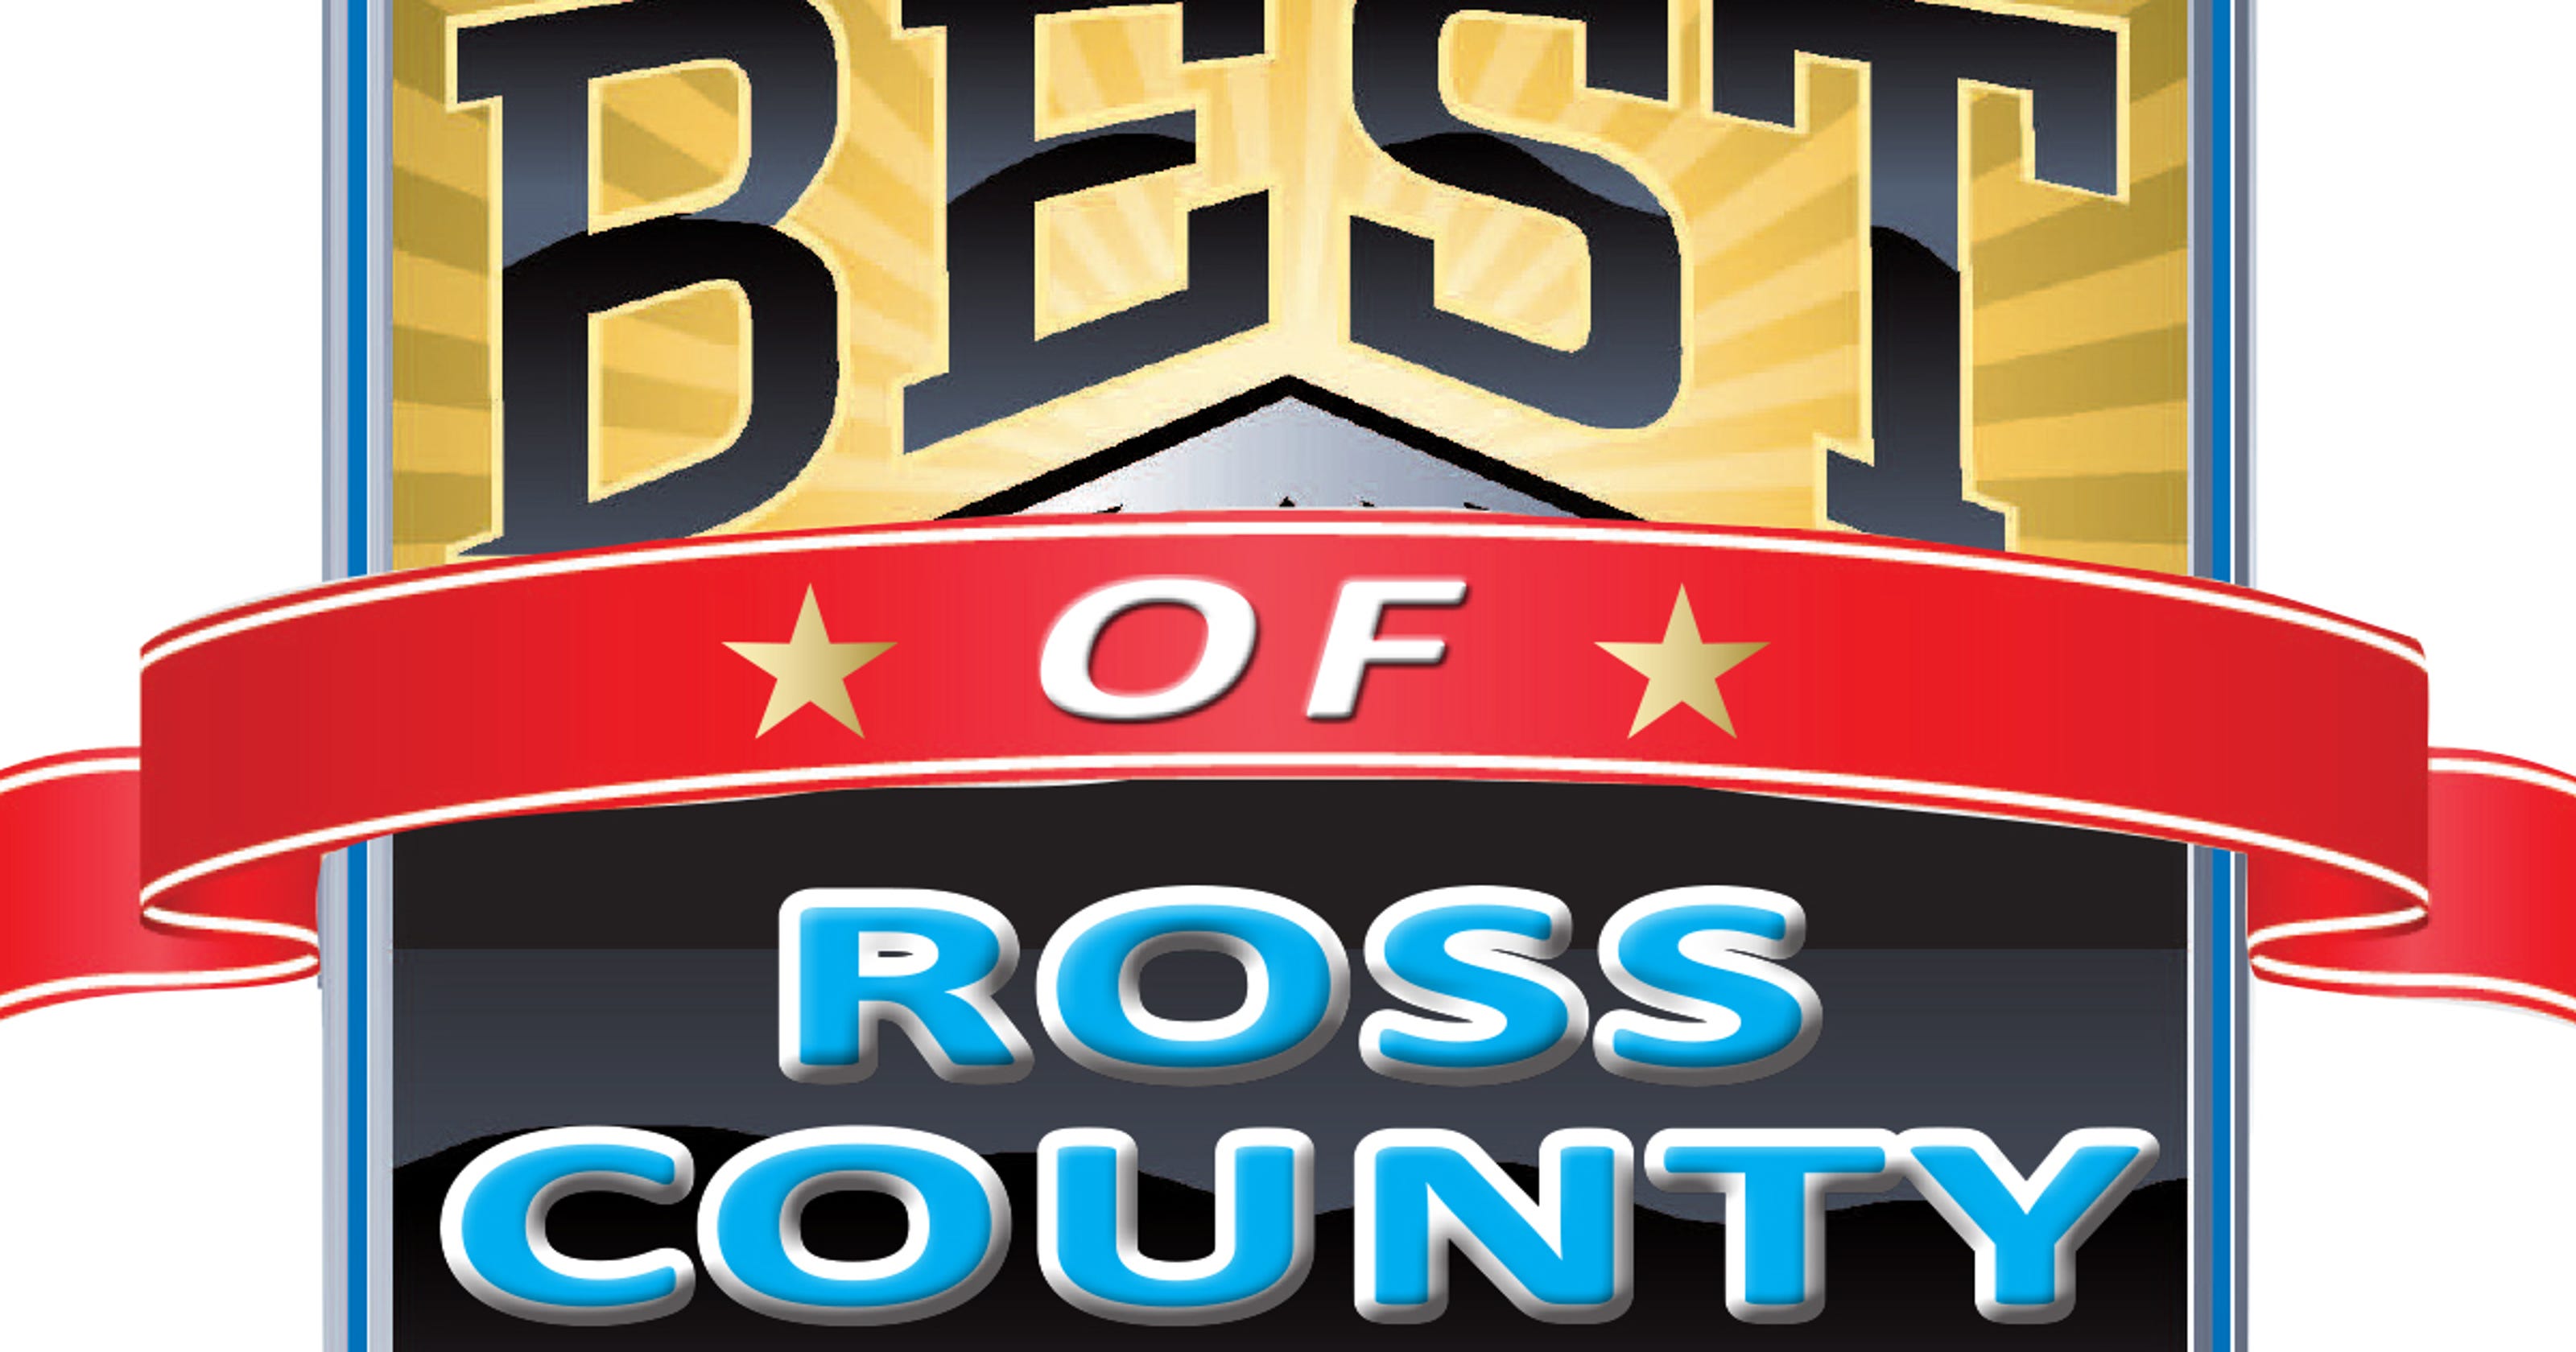 Who are the Best of Ross County?